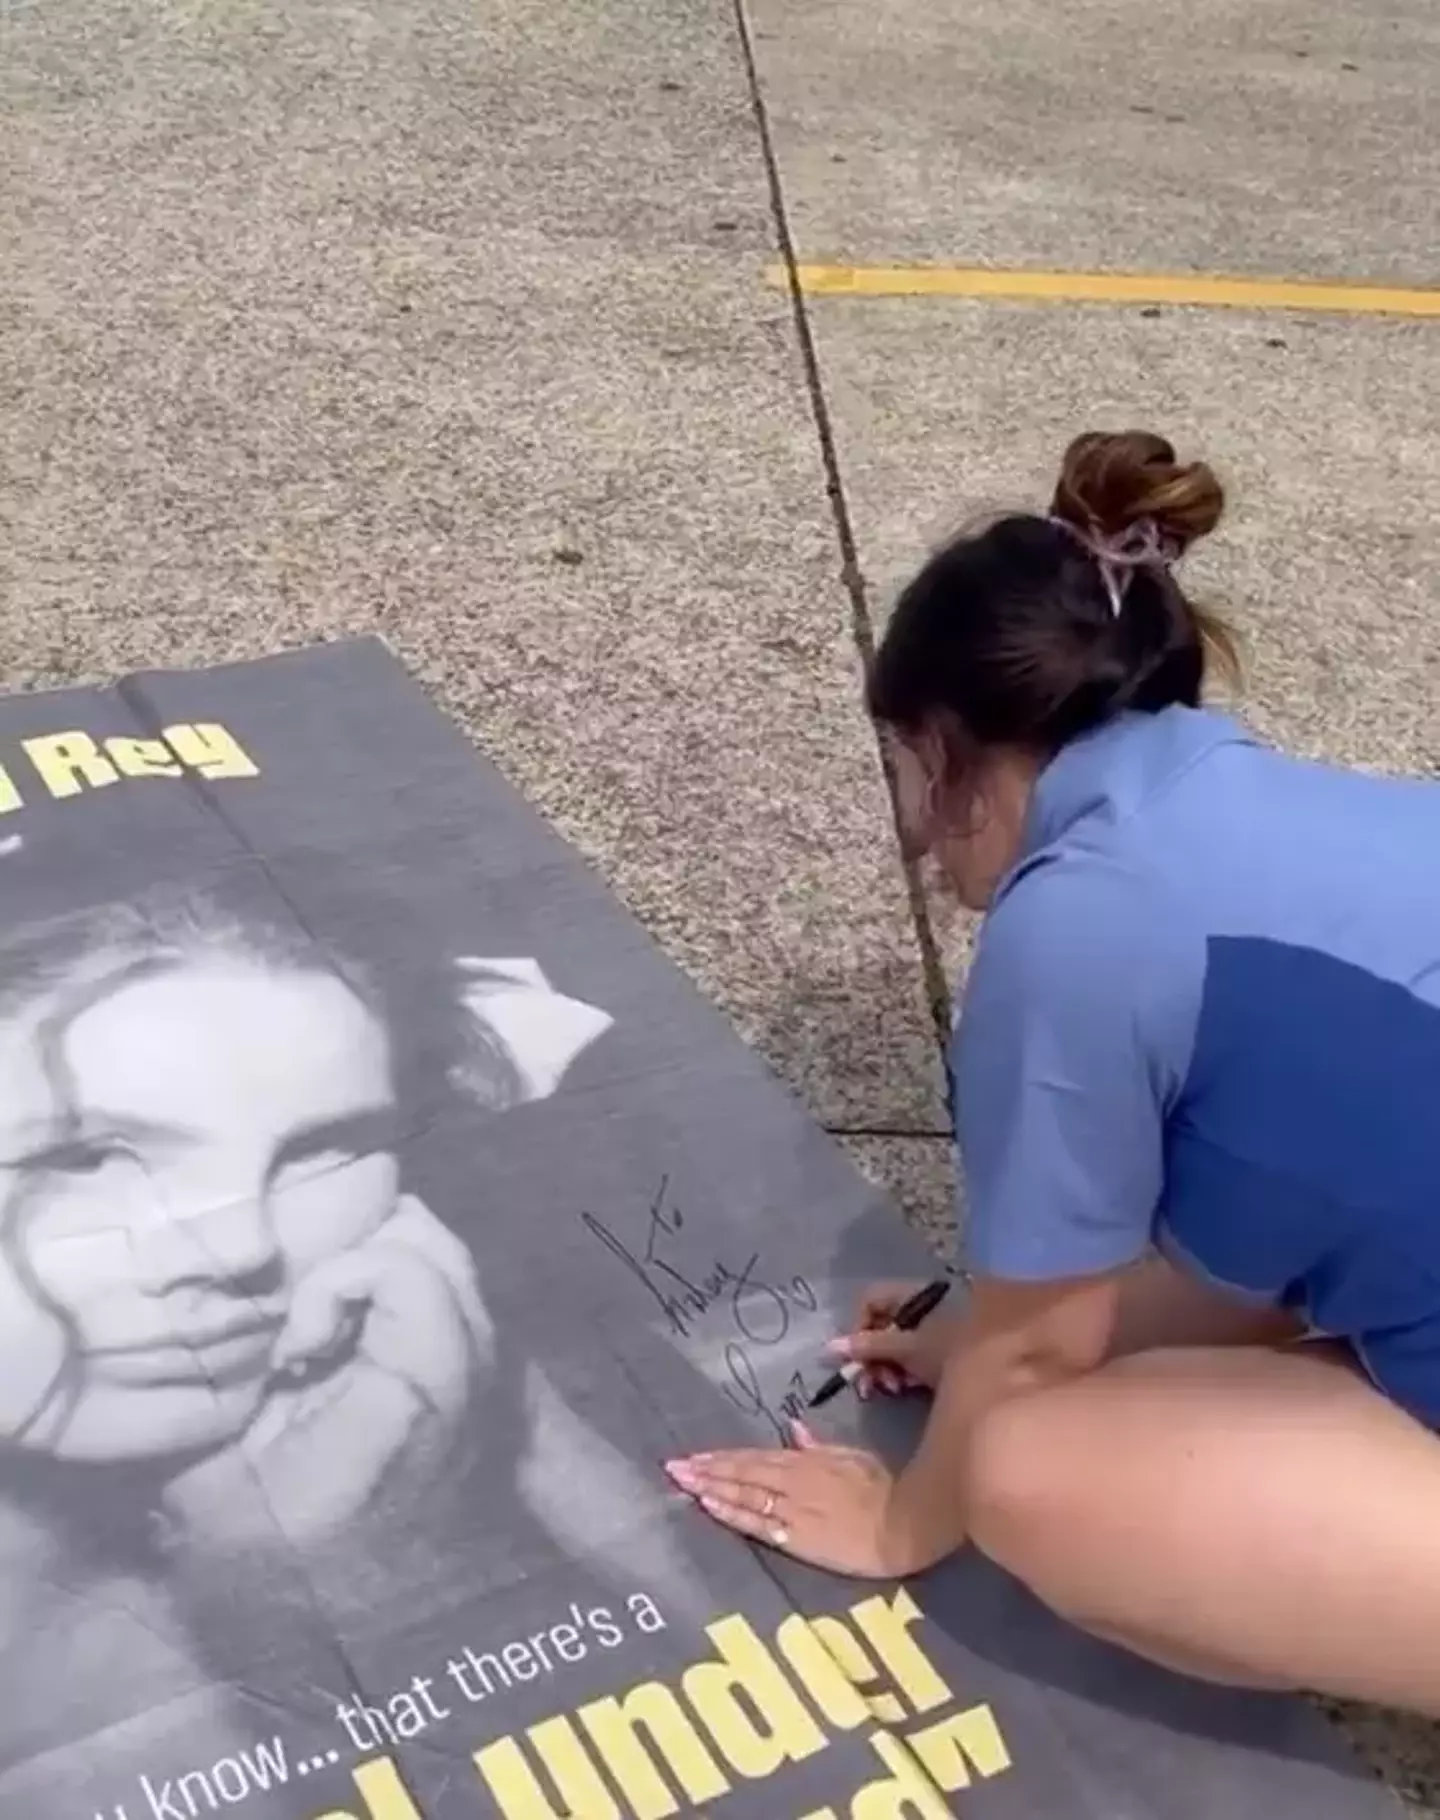 The singer stopped to sign a fan's poster.